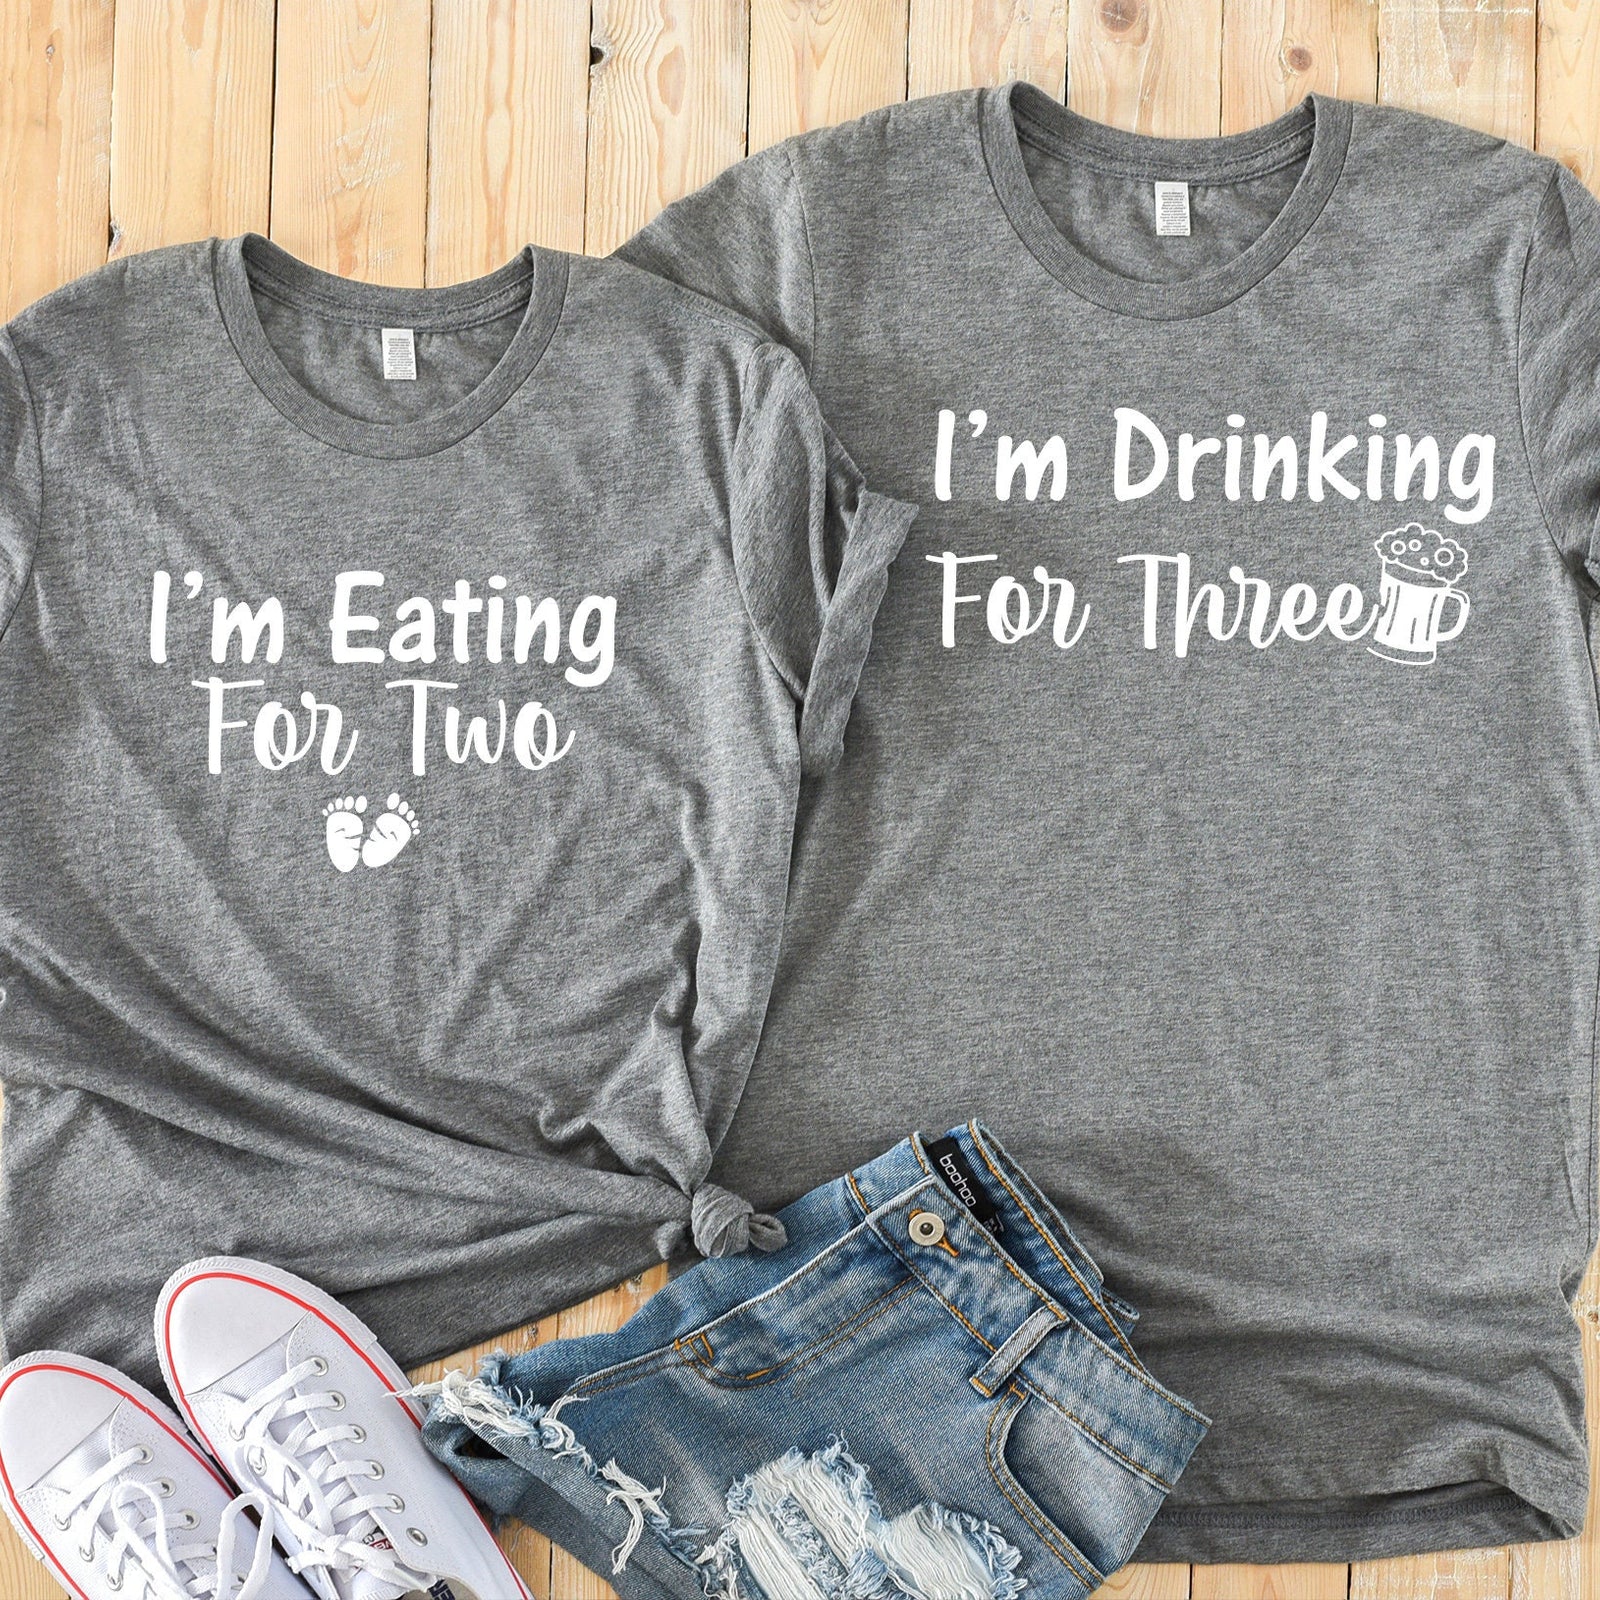 I'm Eating for Two and I'm Drinking for Three T Shirts - Cute Pregnancy Shirt - Funny Baby Announcement Shirt